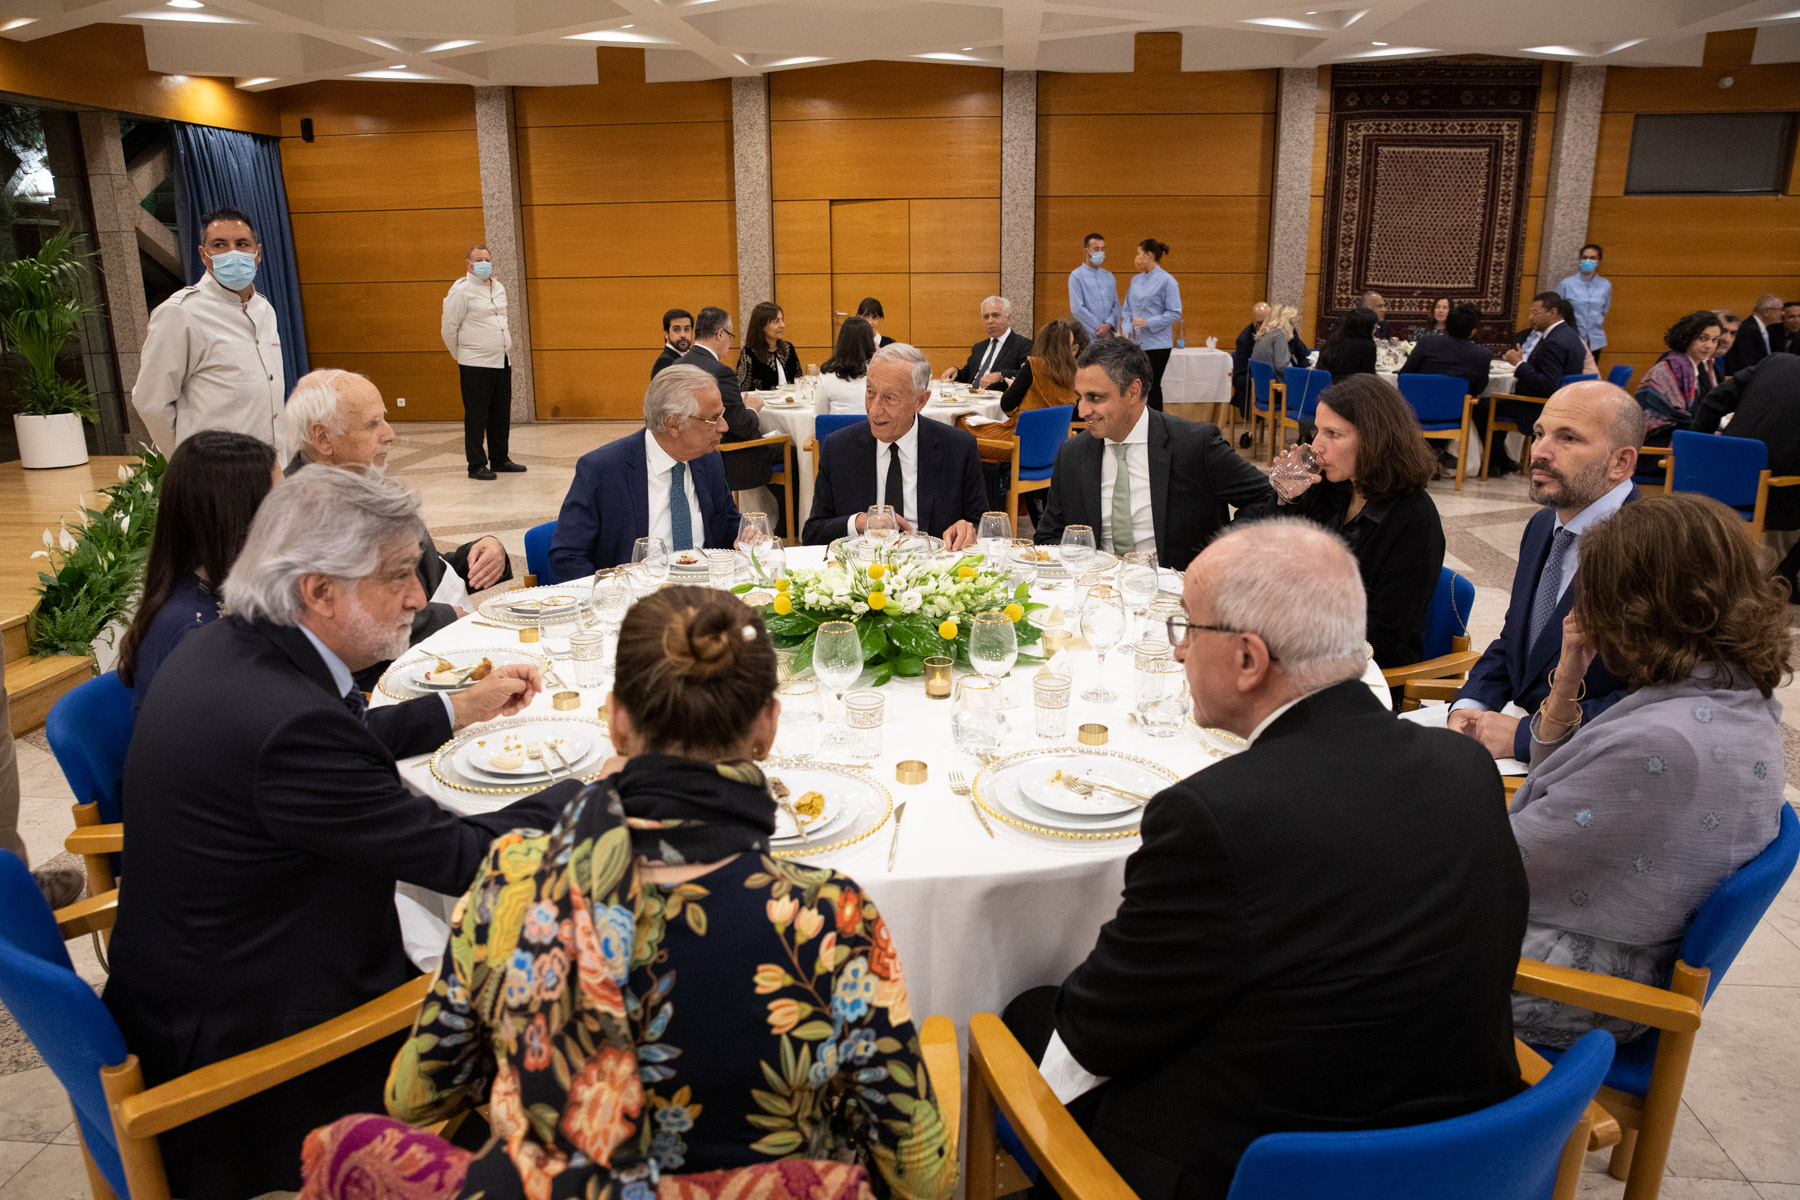 The President of Portugal, Marcelo Rebelo de Sousa, Princess Zahra Aga Khan, and Nazim Ahmed, Diplomatic Representative of the Ismaili Imamat to Portugal at the Ismaili Centre Lisbon for the Itfar dinner, April 21, 2022. Photo: © Miguel Figueiredo Lopez/Presidency of the Republic of Portugal.